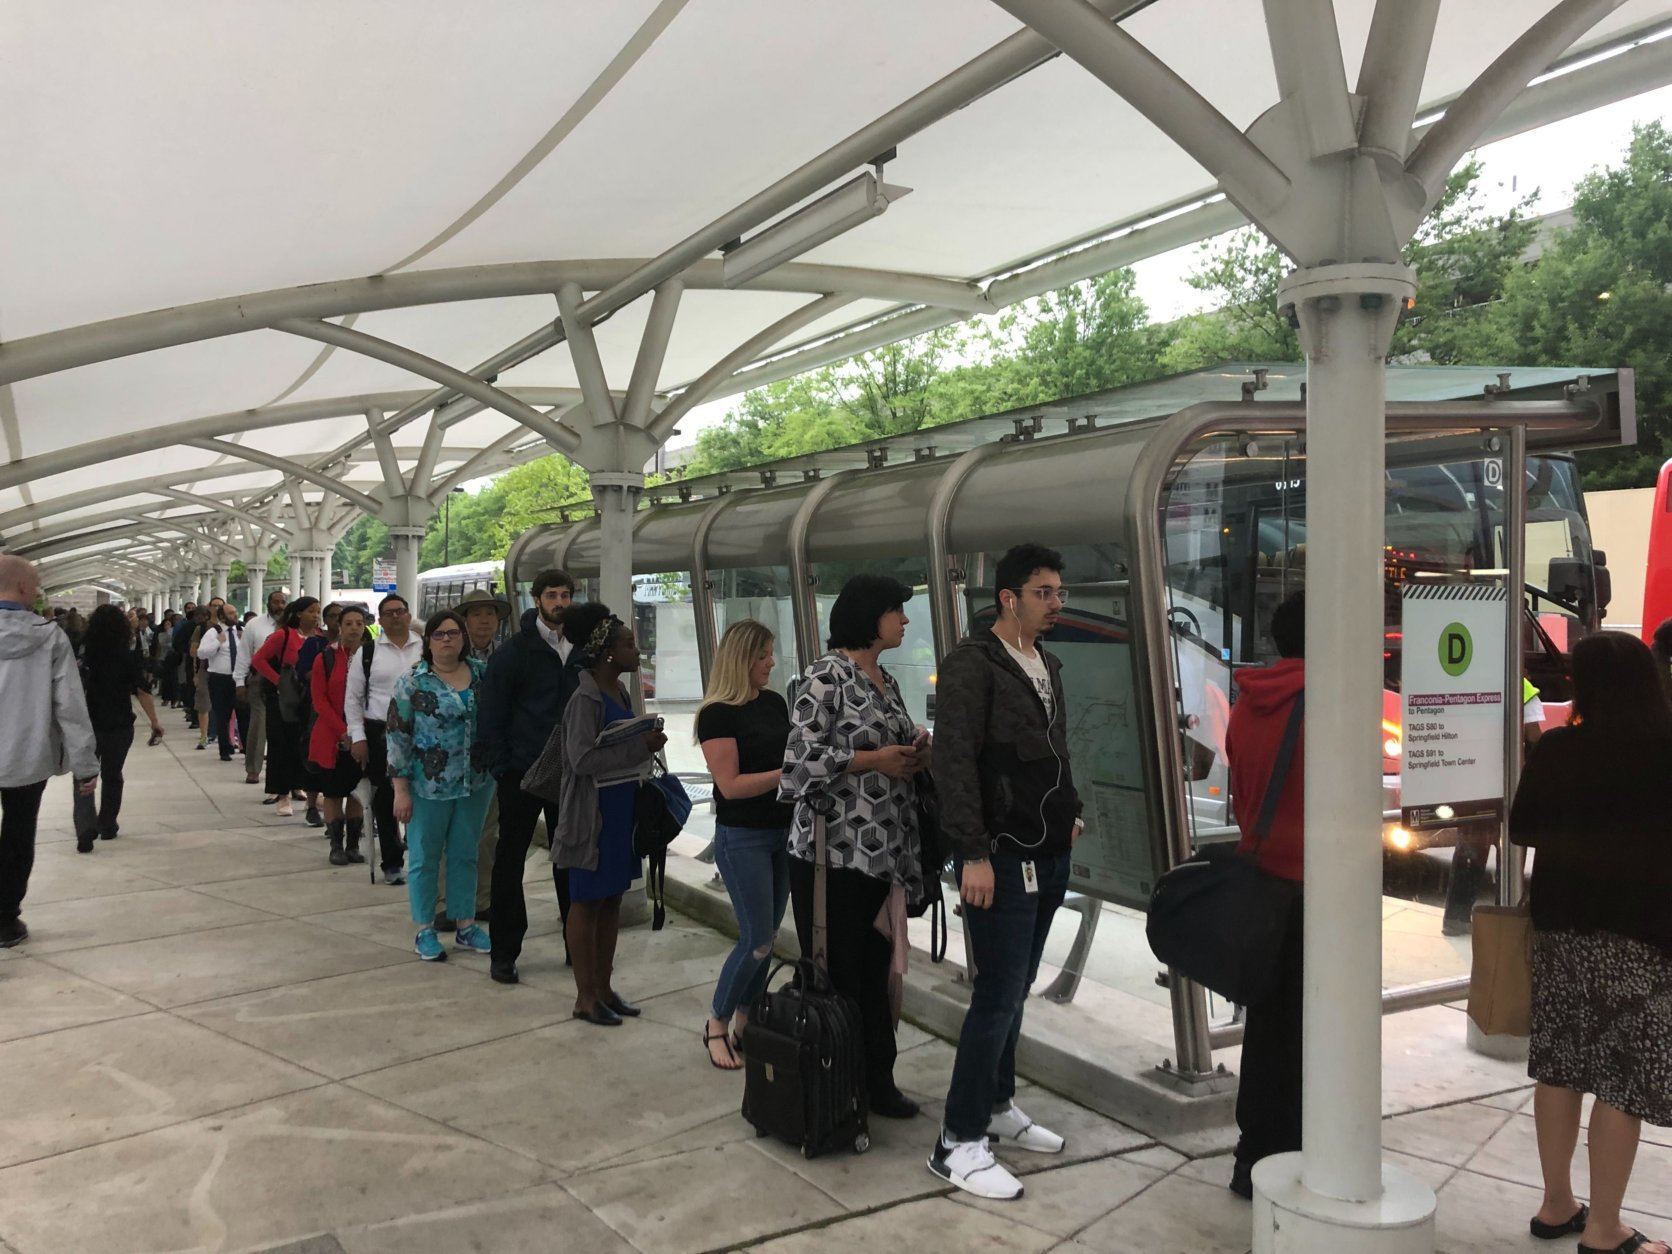 Commuters line up for a Metro shuttle bus outside the Franconia-Springfield station. (WTOP/Melissa Howell)